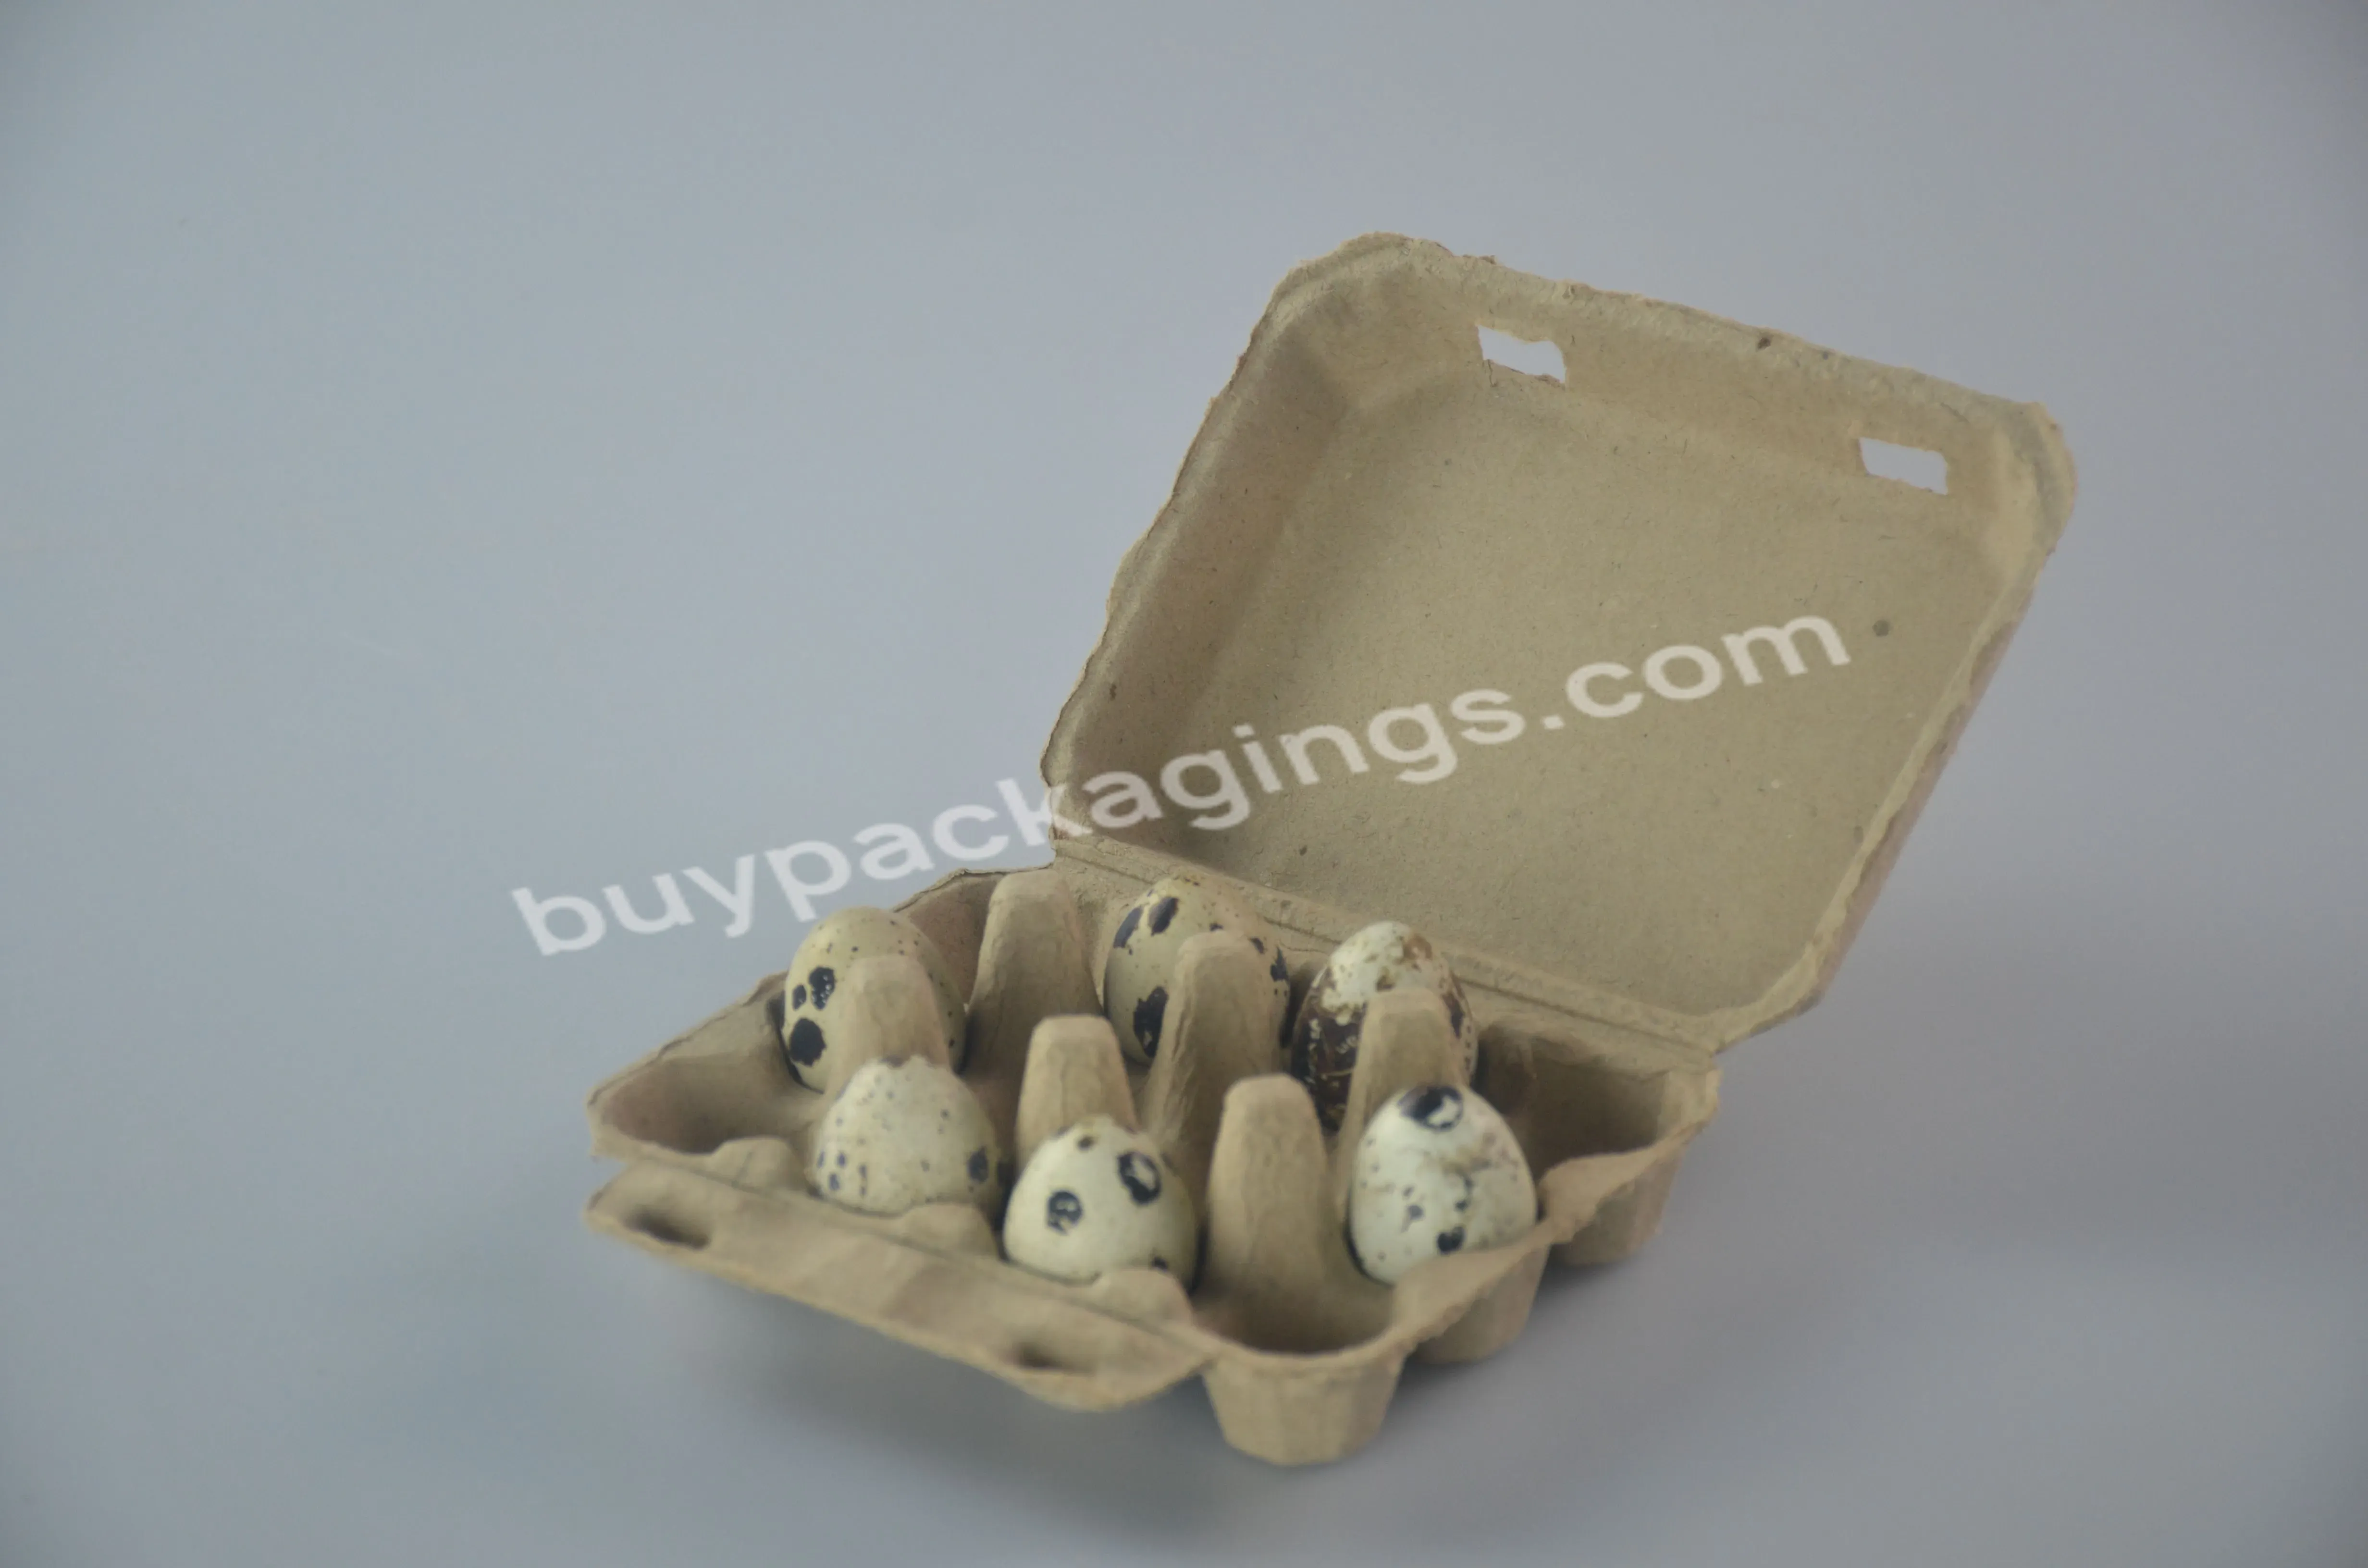 Quail Egg Cartons - Recycled Cardboard Paper Pulp 3x4 Square Style - Holds One Dozen Eggs (30) - Buy Quail Egg Cartons For Sale,Egg Carton,Custom Egg Cartons.